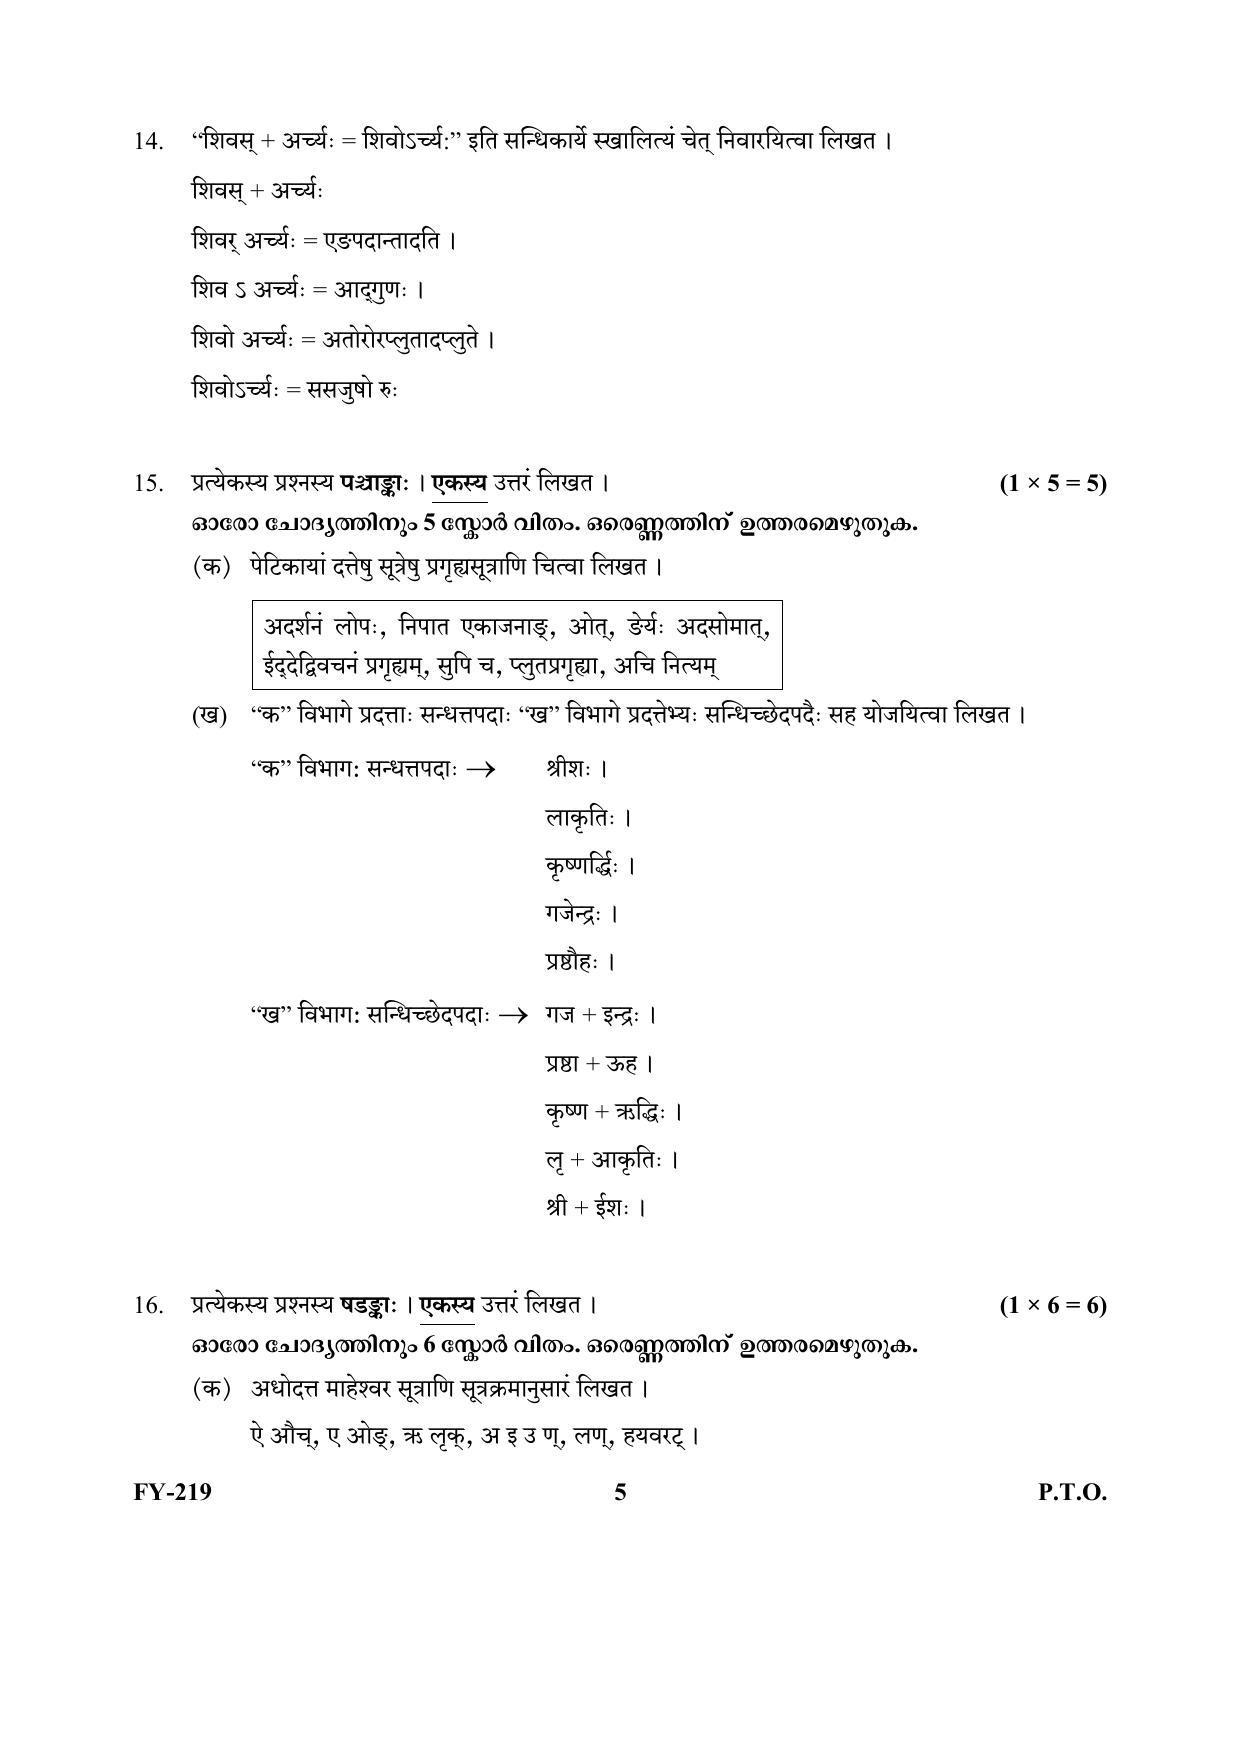 Kerala Plus One (Class 11th) Part-III Sanskrit Sasthra-Optional Question Paper 2021 - Page 5